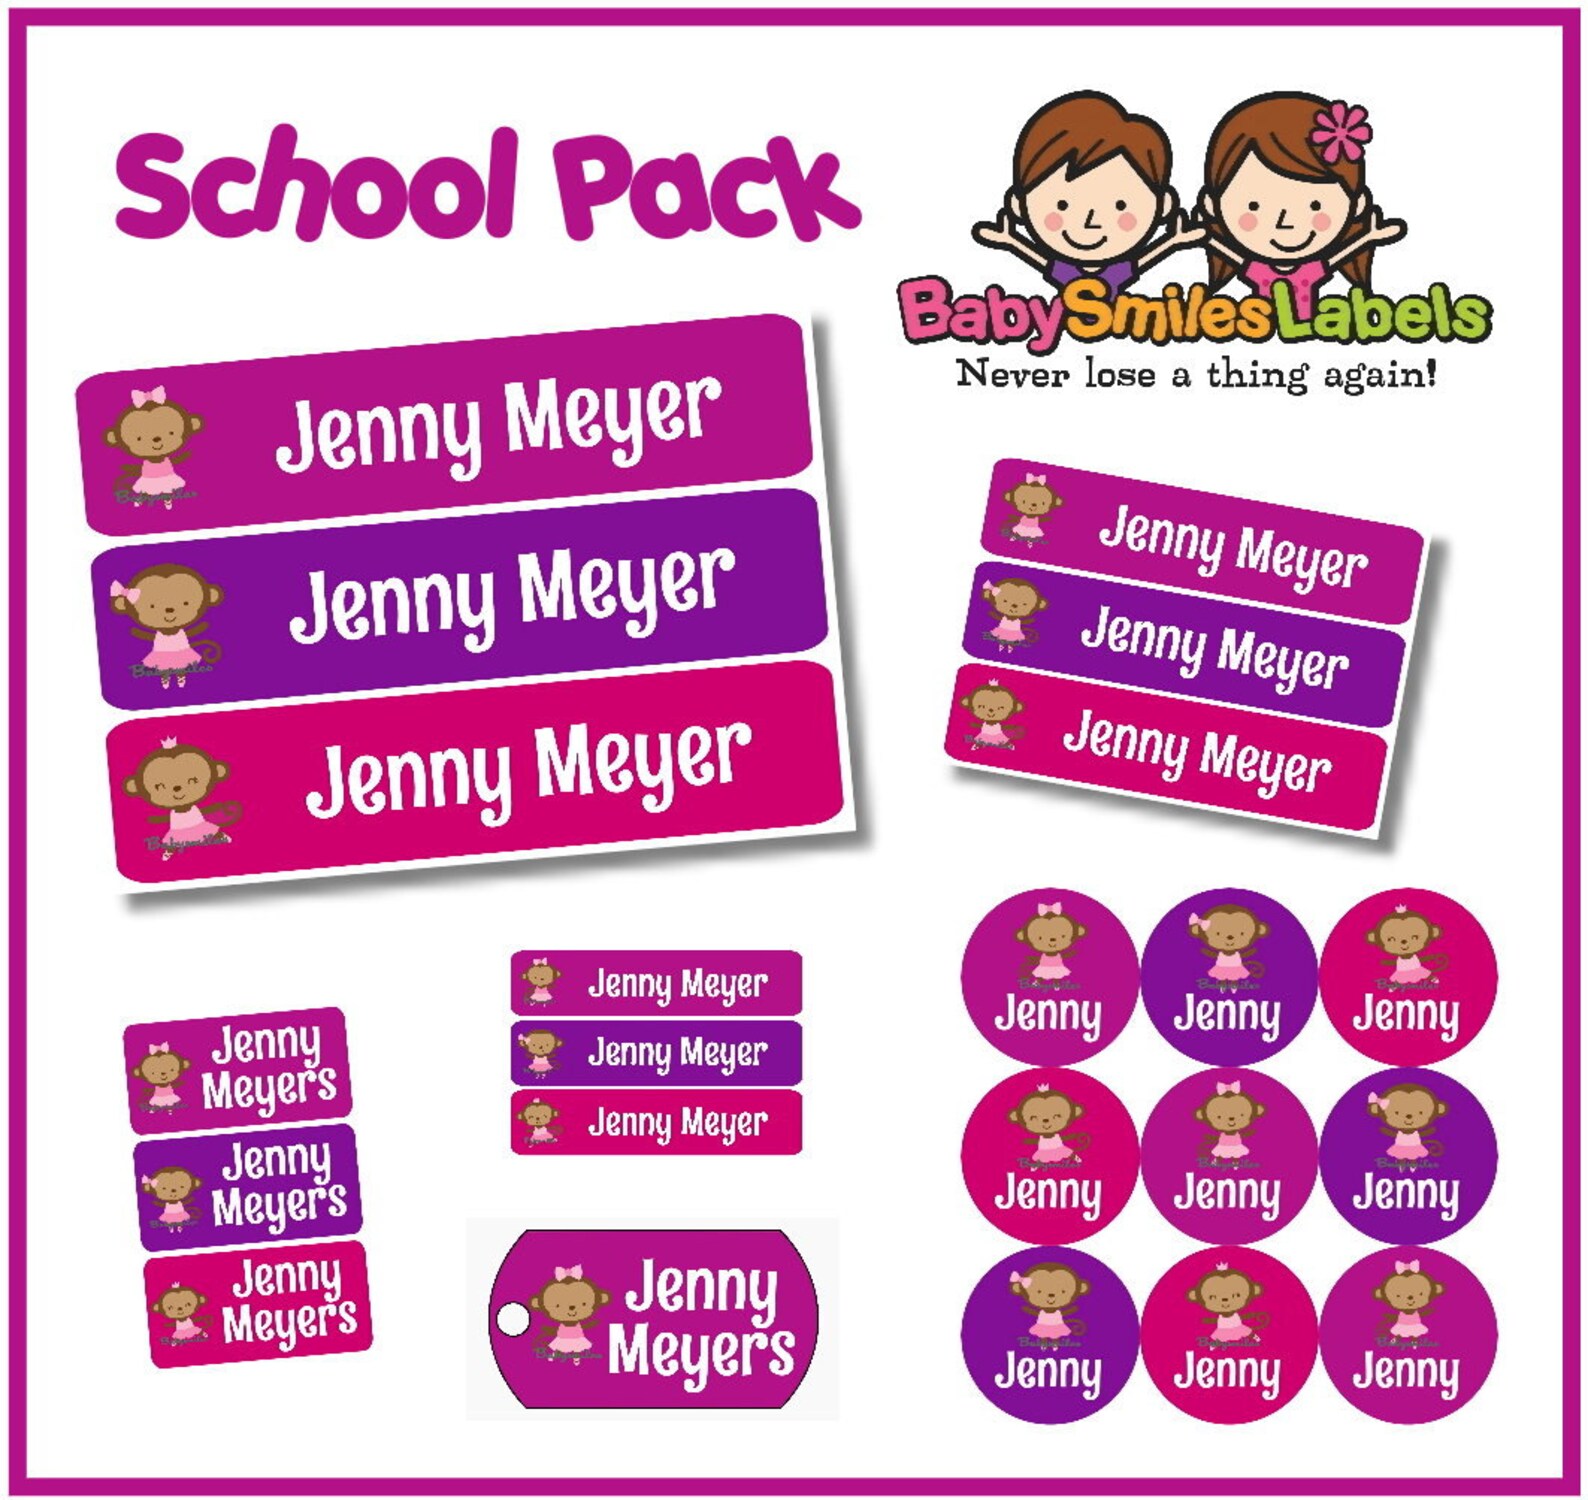 school pack - personalized waterproof labels shoe labels clothing tag labels bag tags daycare labels name labels - monkey ballet